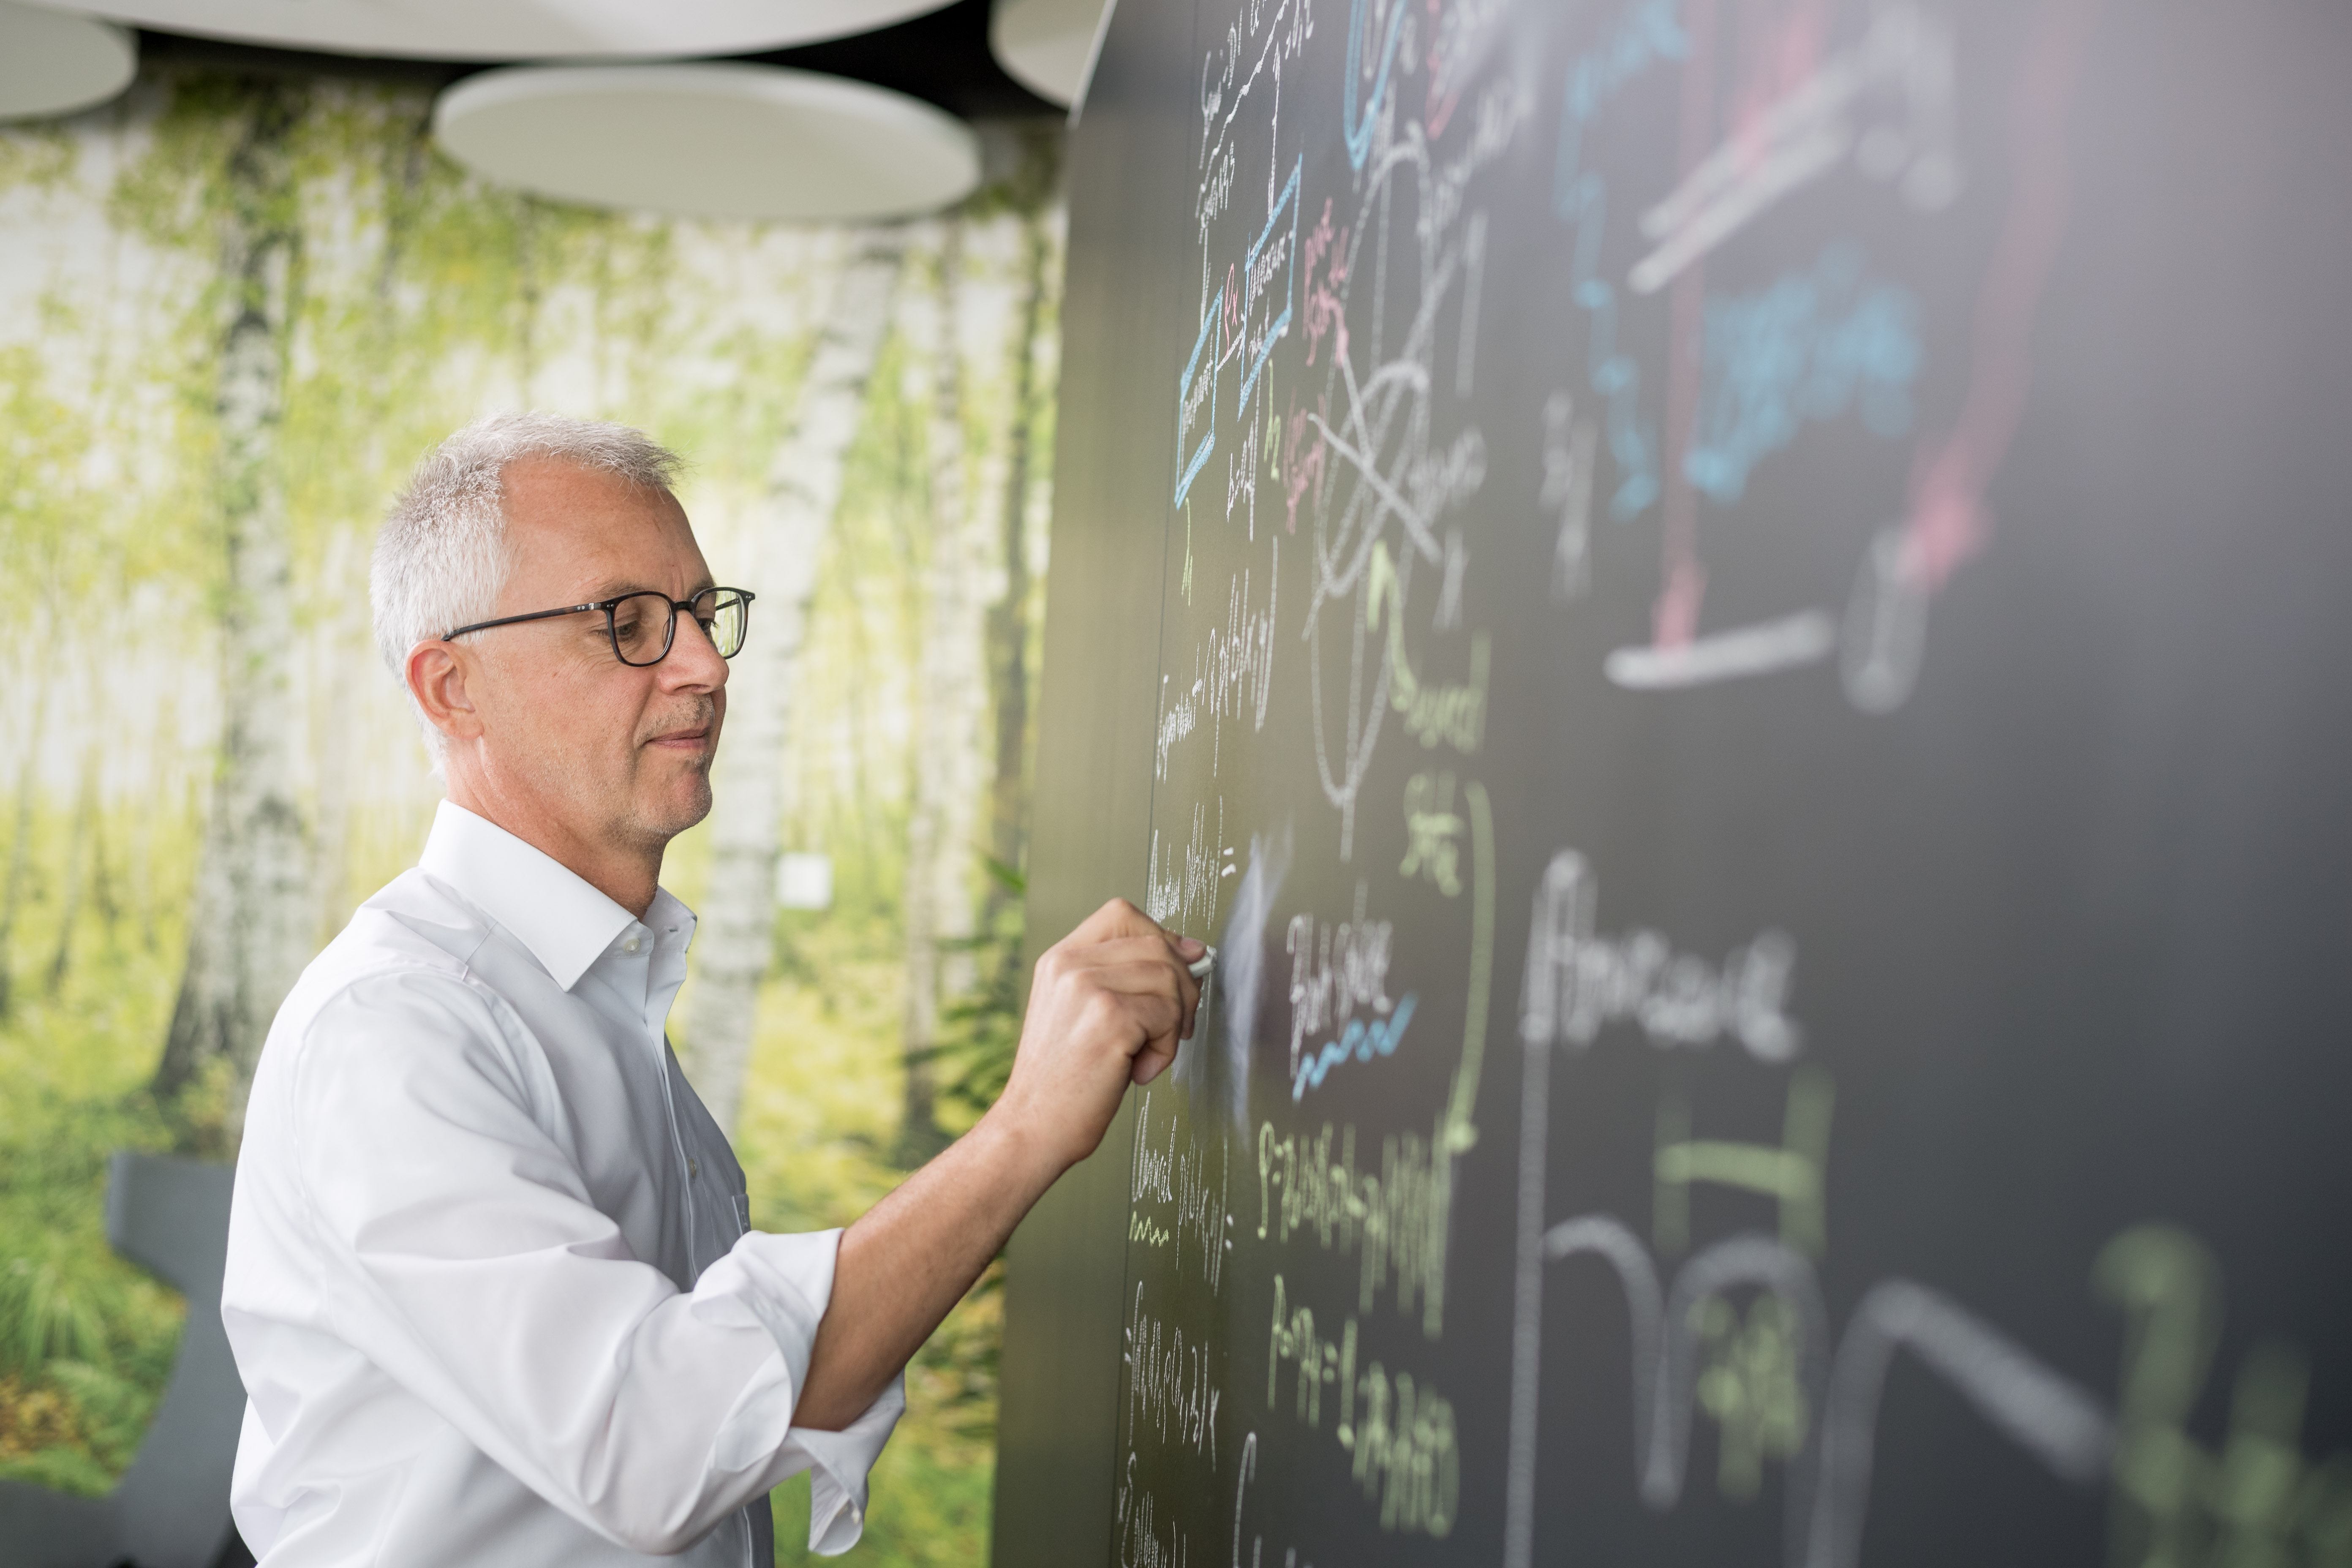 Bosch currently has some 30 experts working in the fields of quantum sensor technology and quantum computing